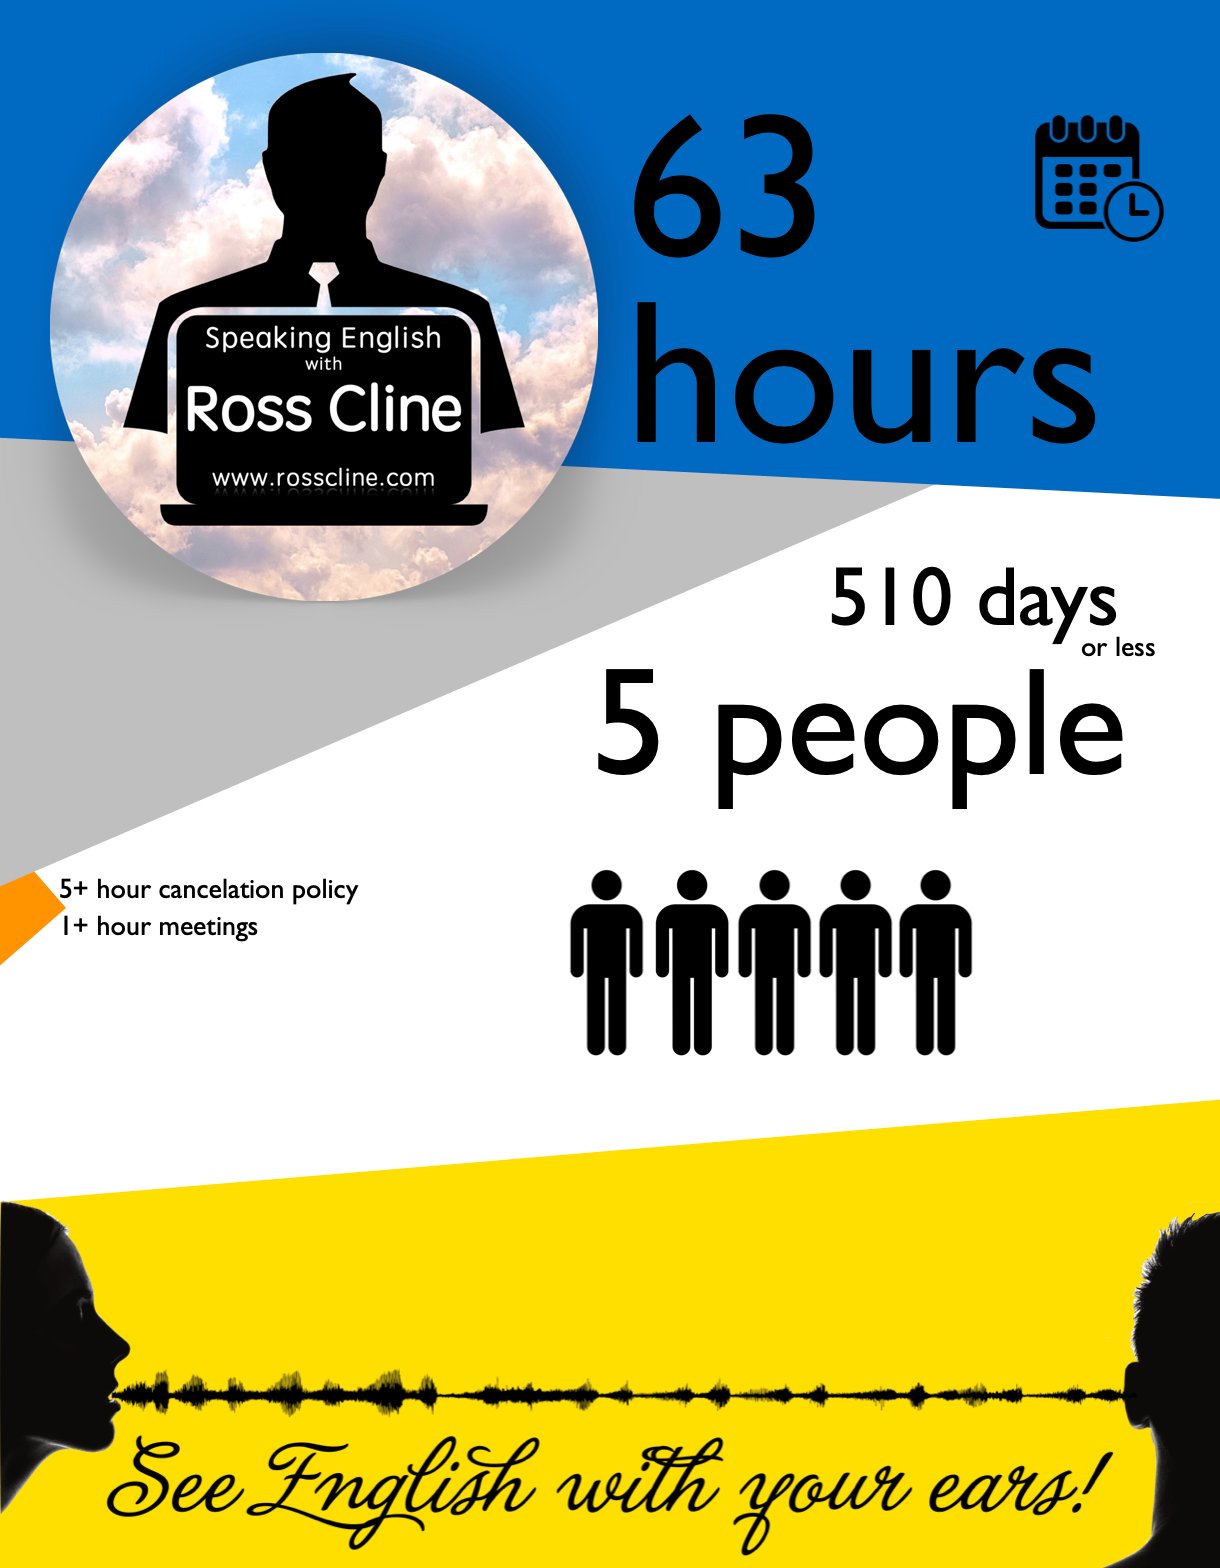 B.) 63 hours of Online Time for 5 people - www.rosscline.com